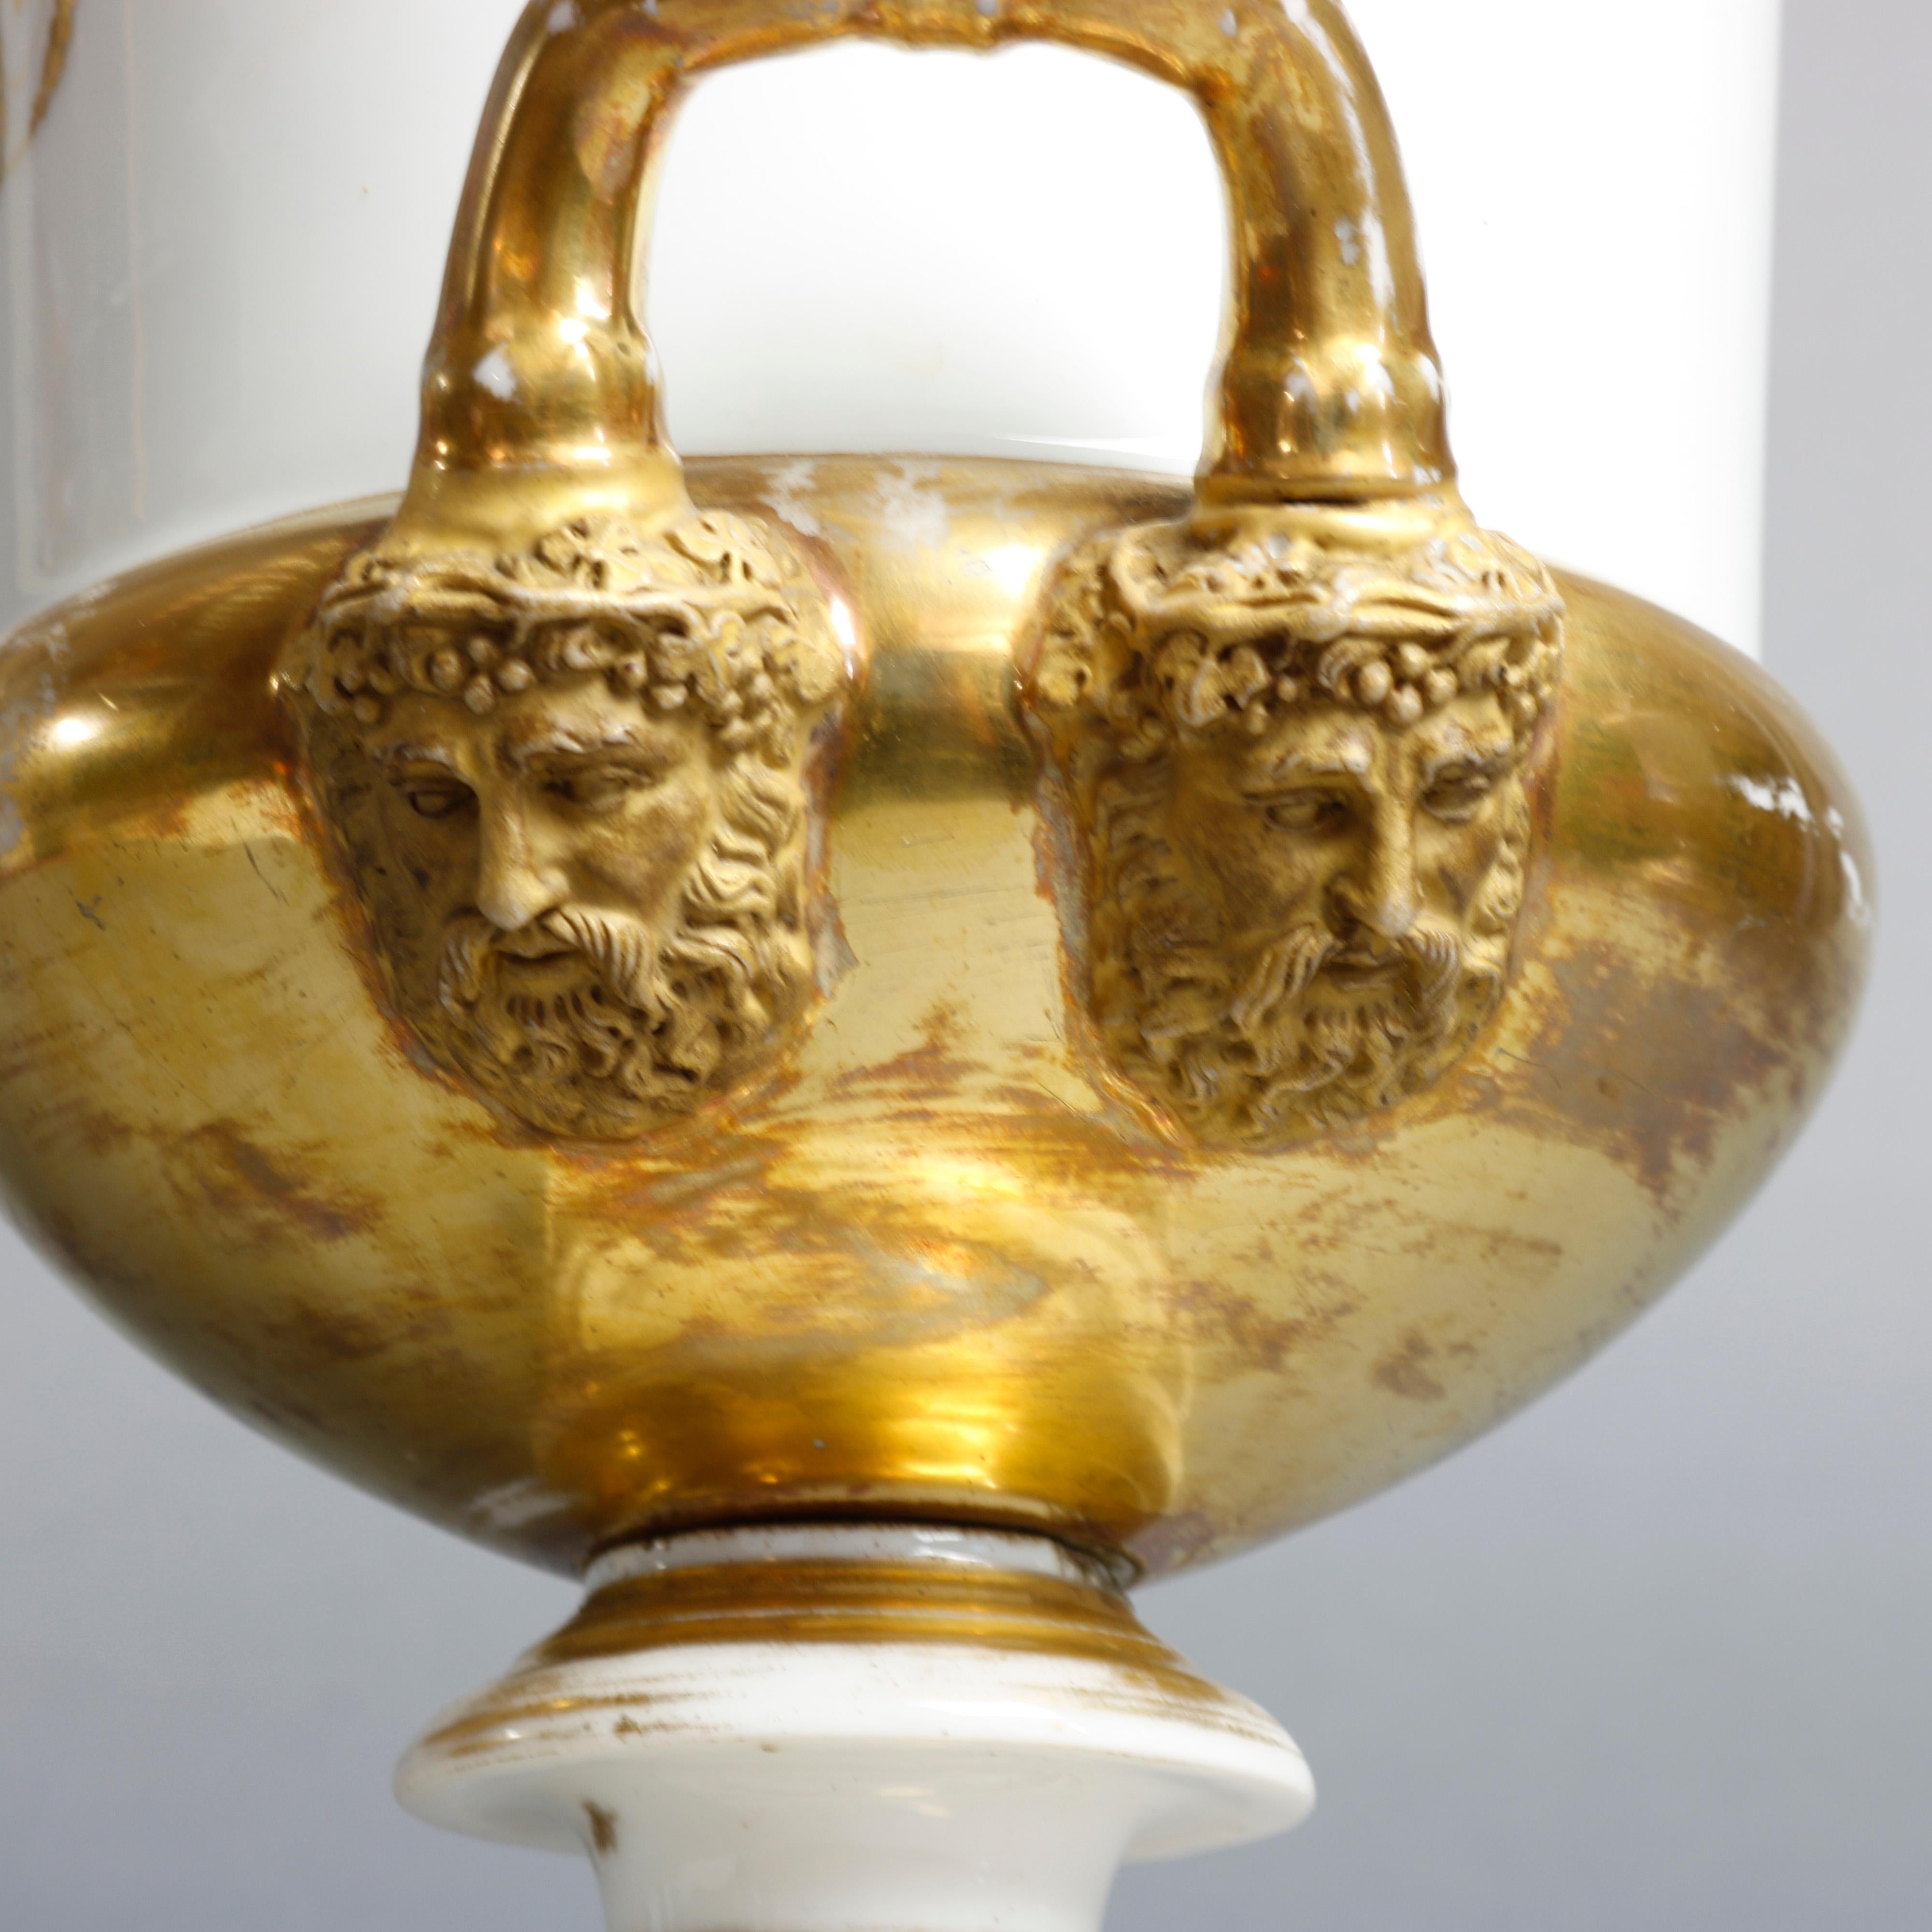 Antique French Old Pairs classical urns offer porcelain construction with double handles having Grecian faces, gilt highlights throughout with scrolled insignia on front possible 